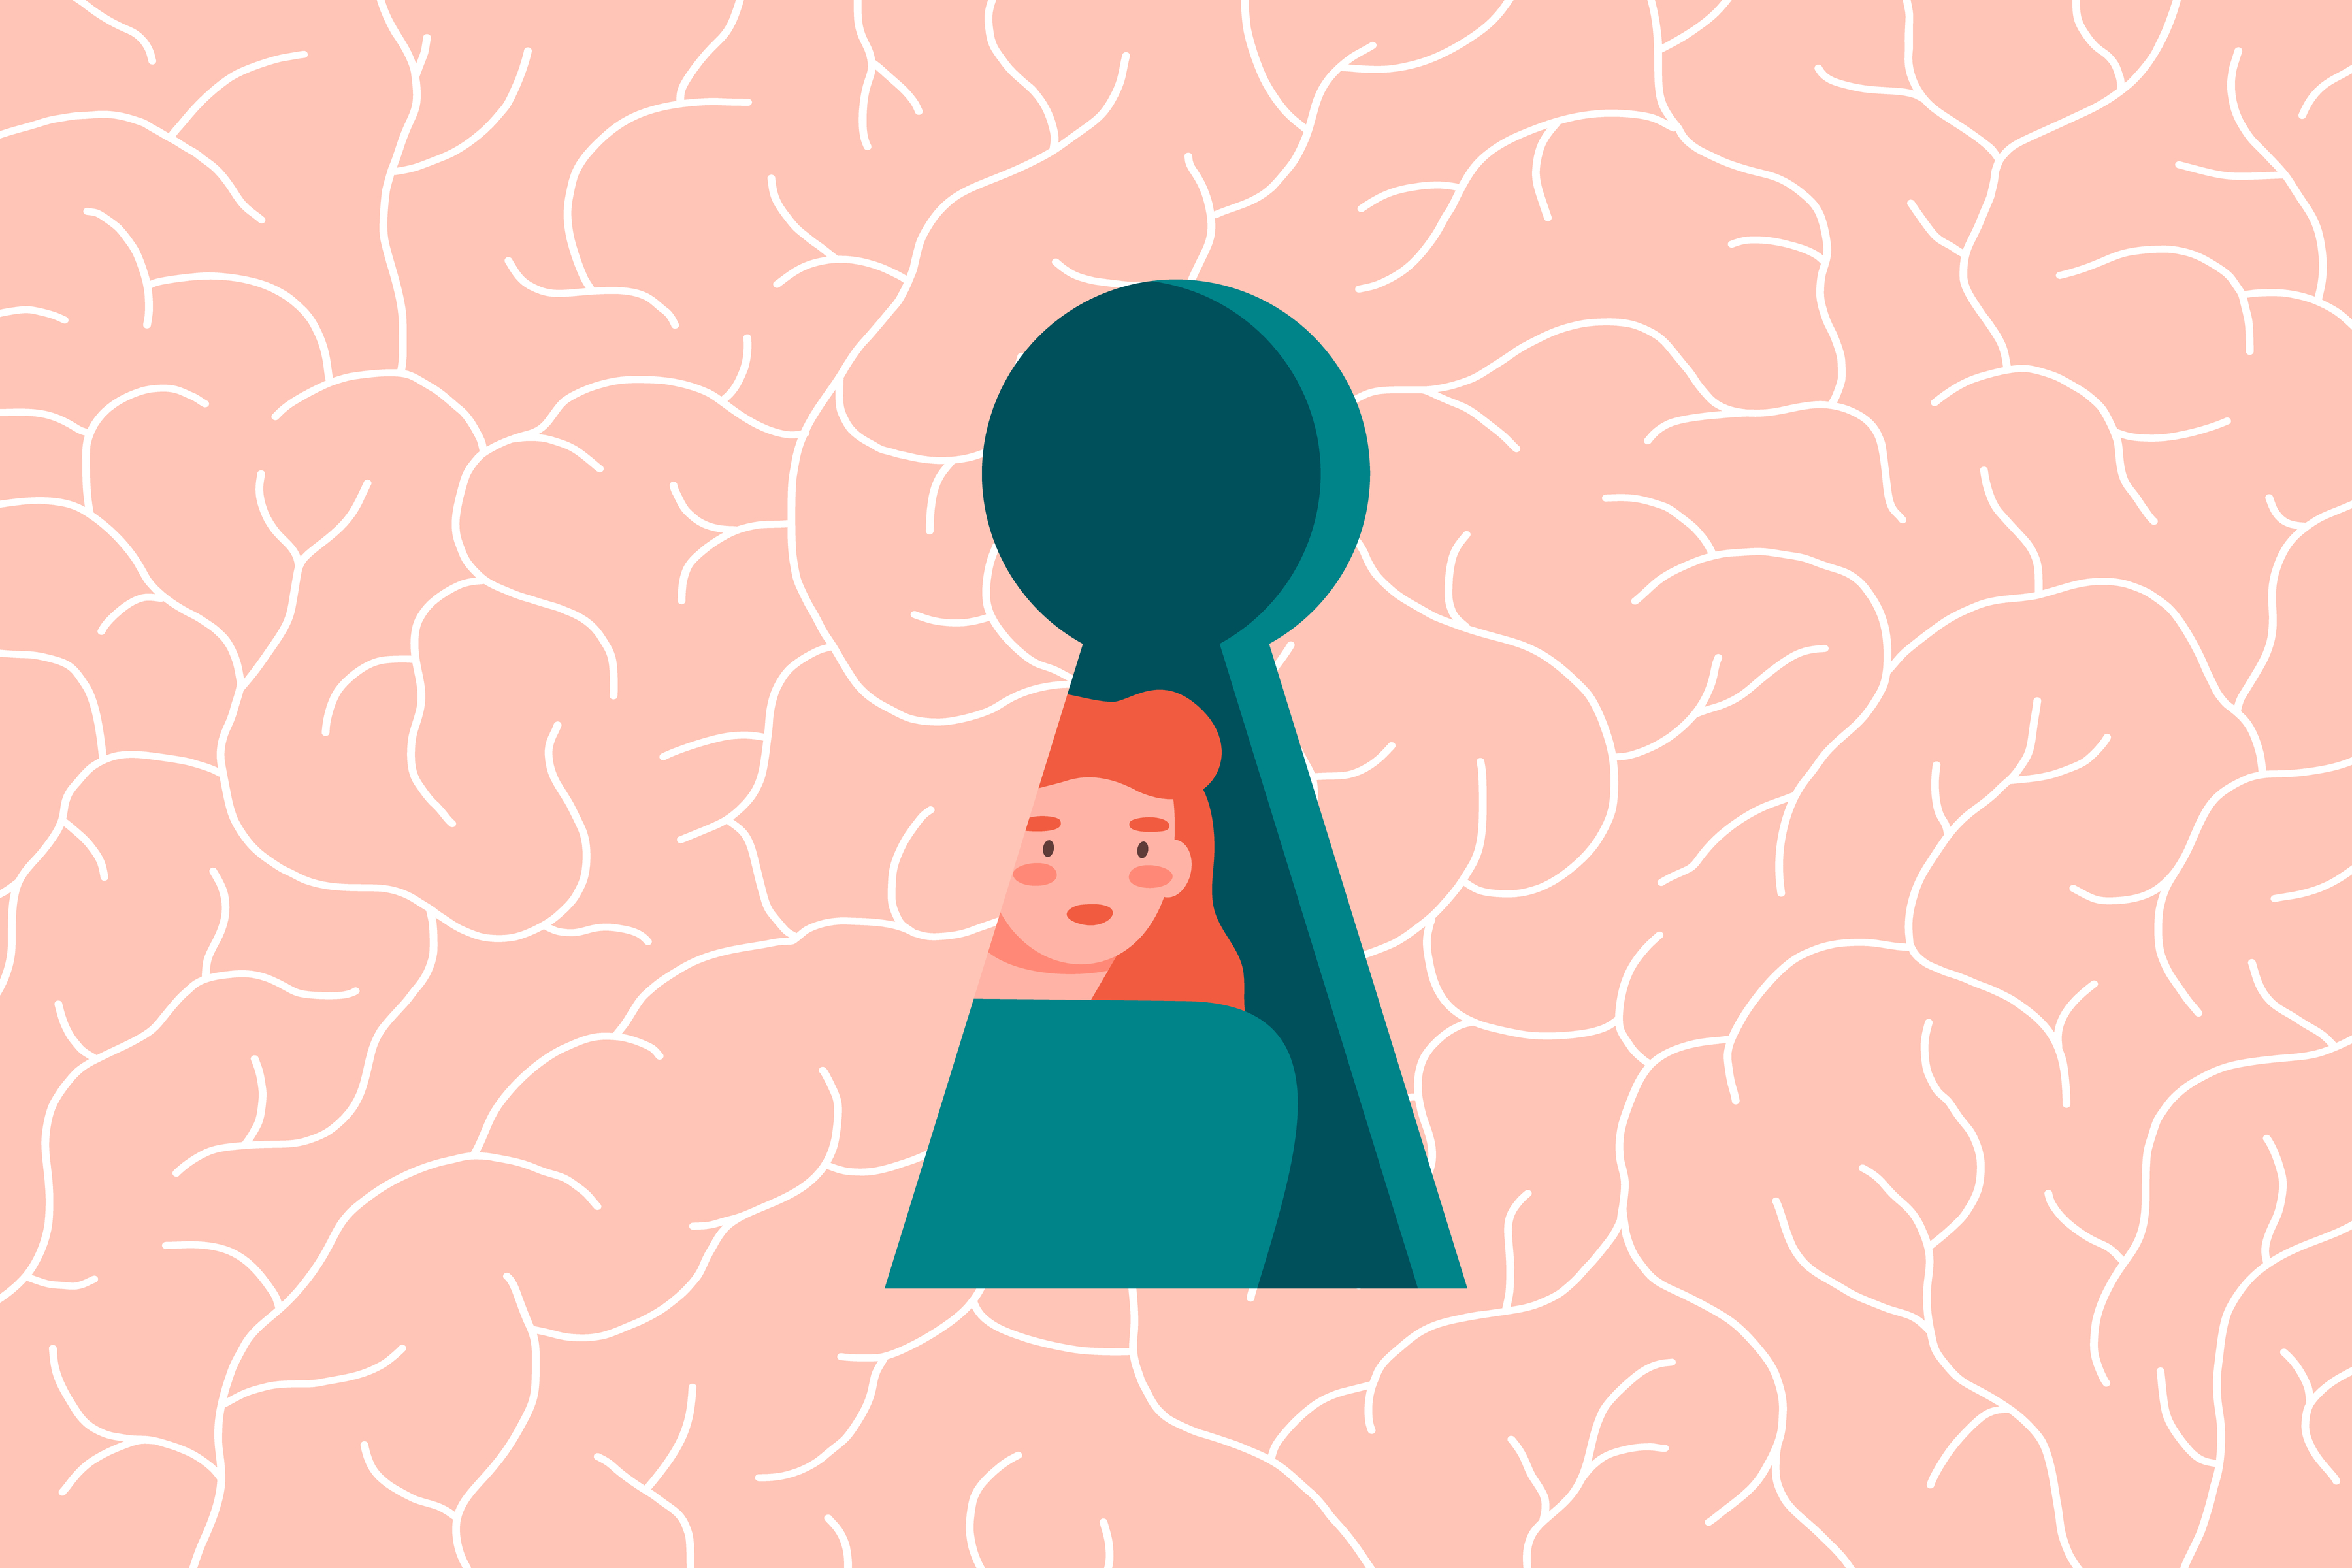 Chicago tech B2B sales illustration of a person looking out a keyhole inside of a pink brain